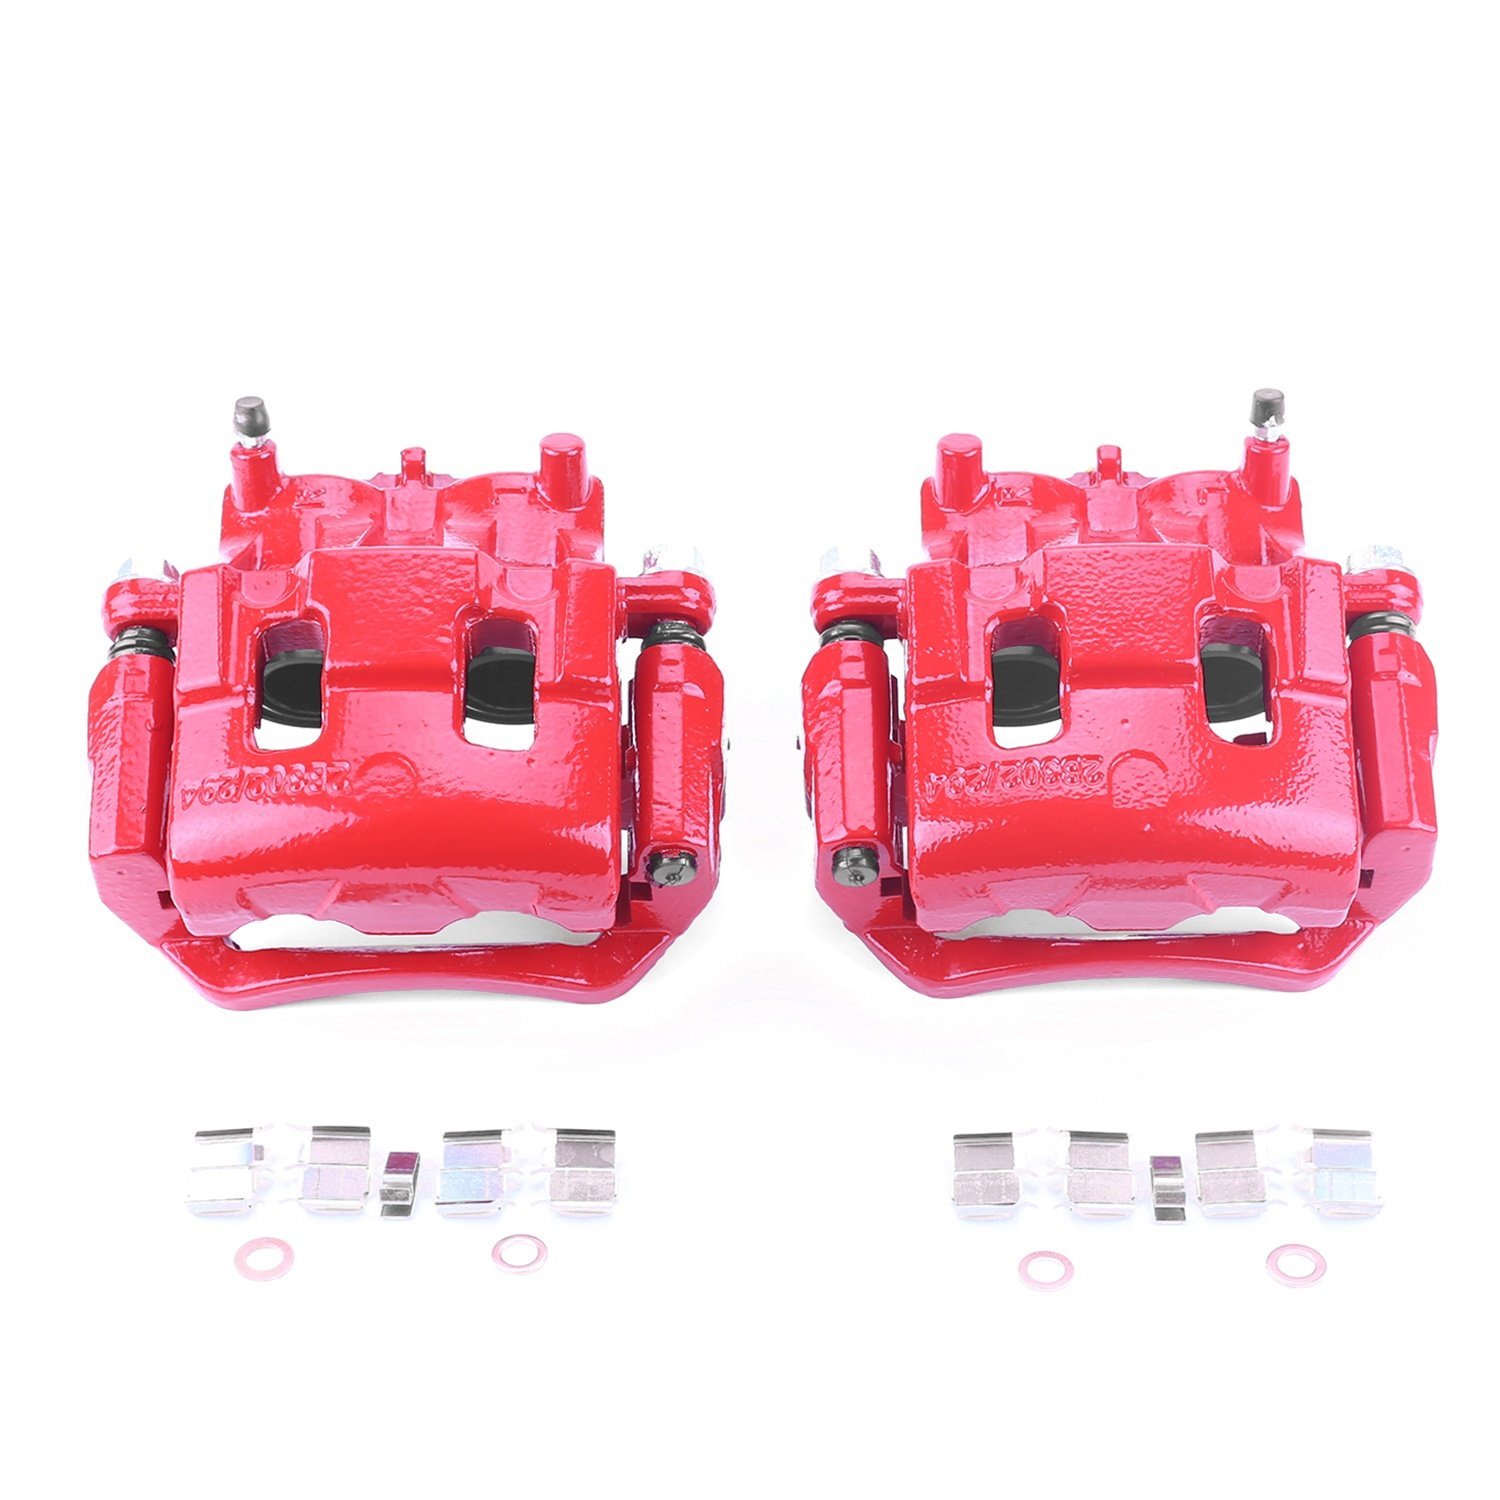 Performance Brake Calipers Fit Select 2007-2015 Ford Edge, Lincoln MKS, Mazda CX-9 [Red Powder-Coat Finish]